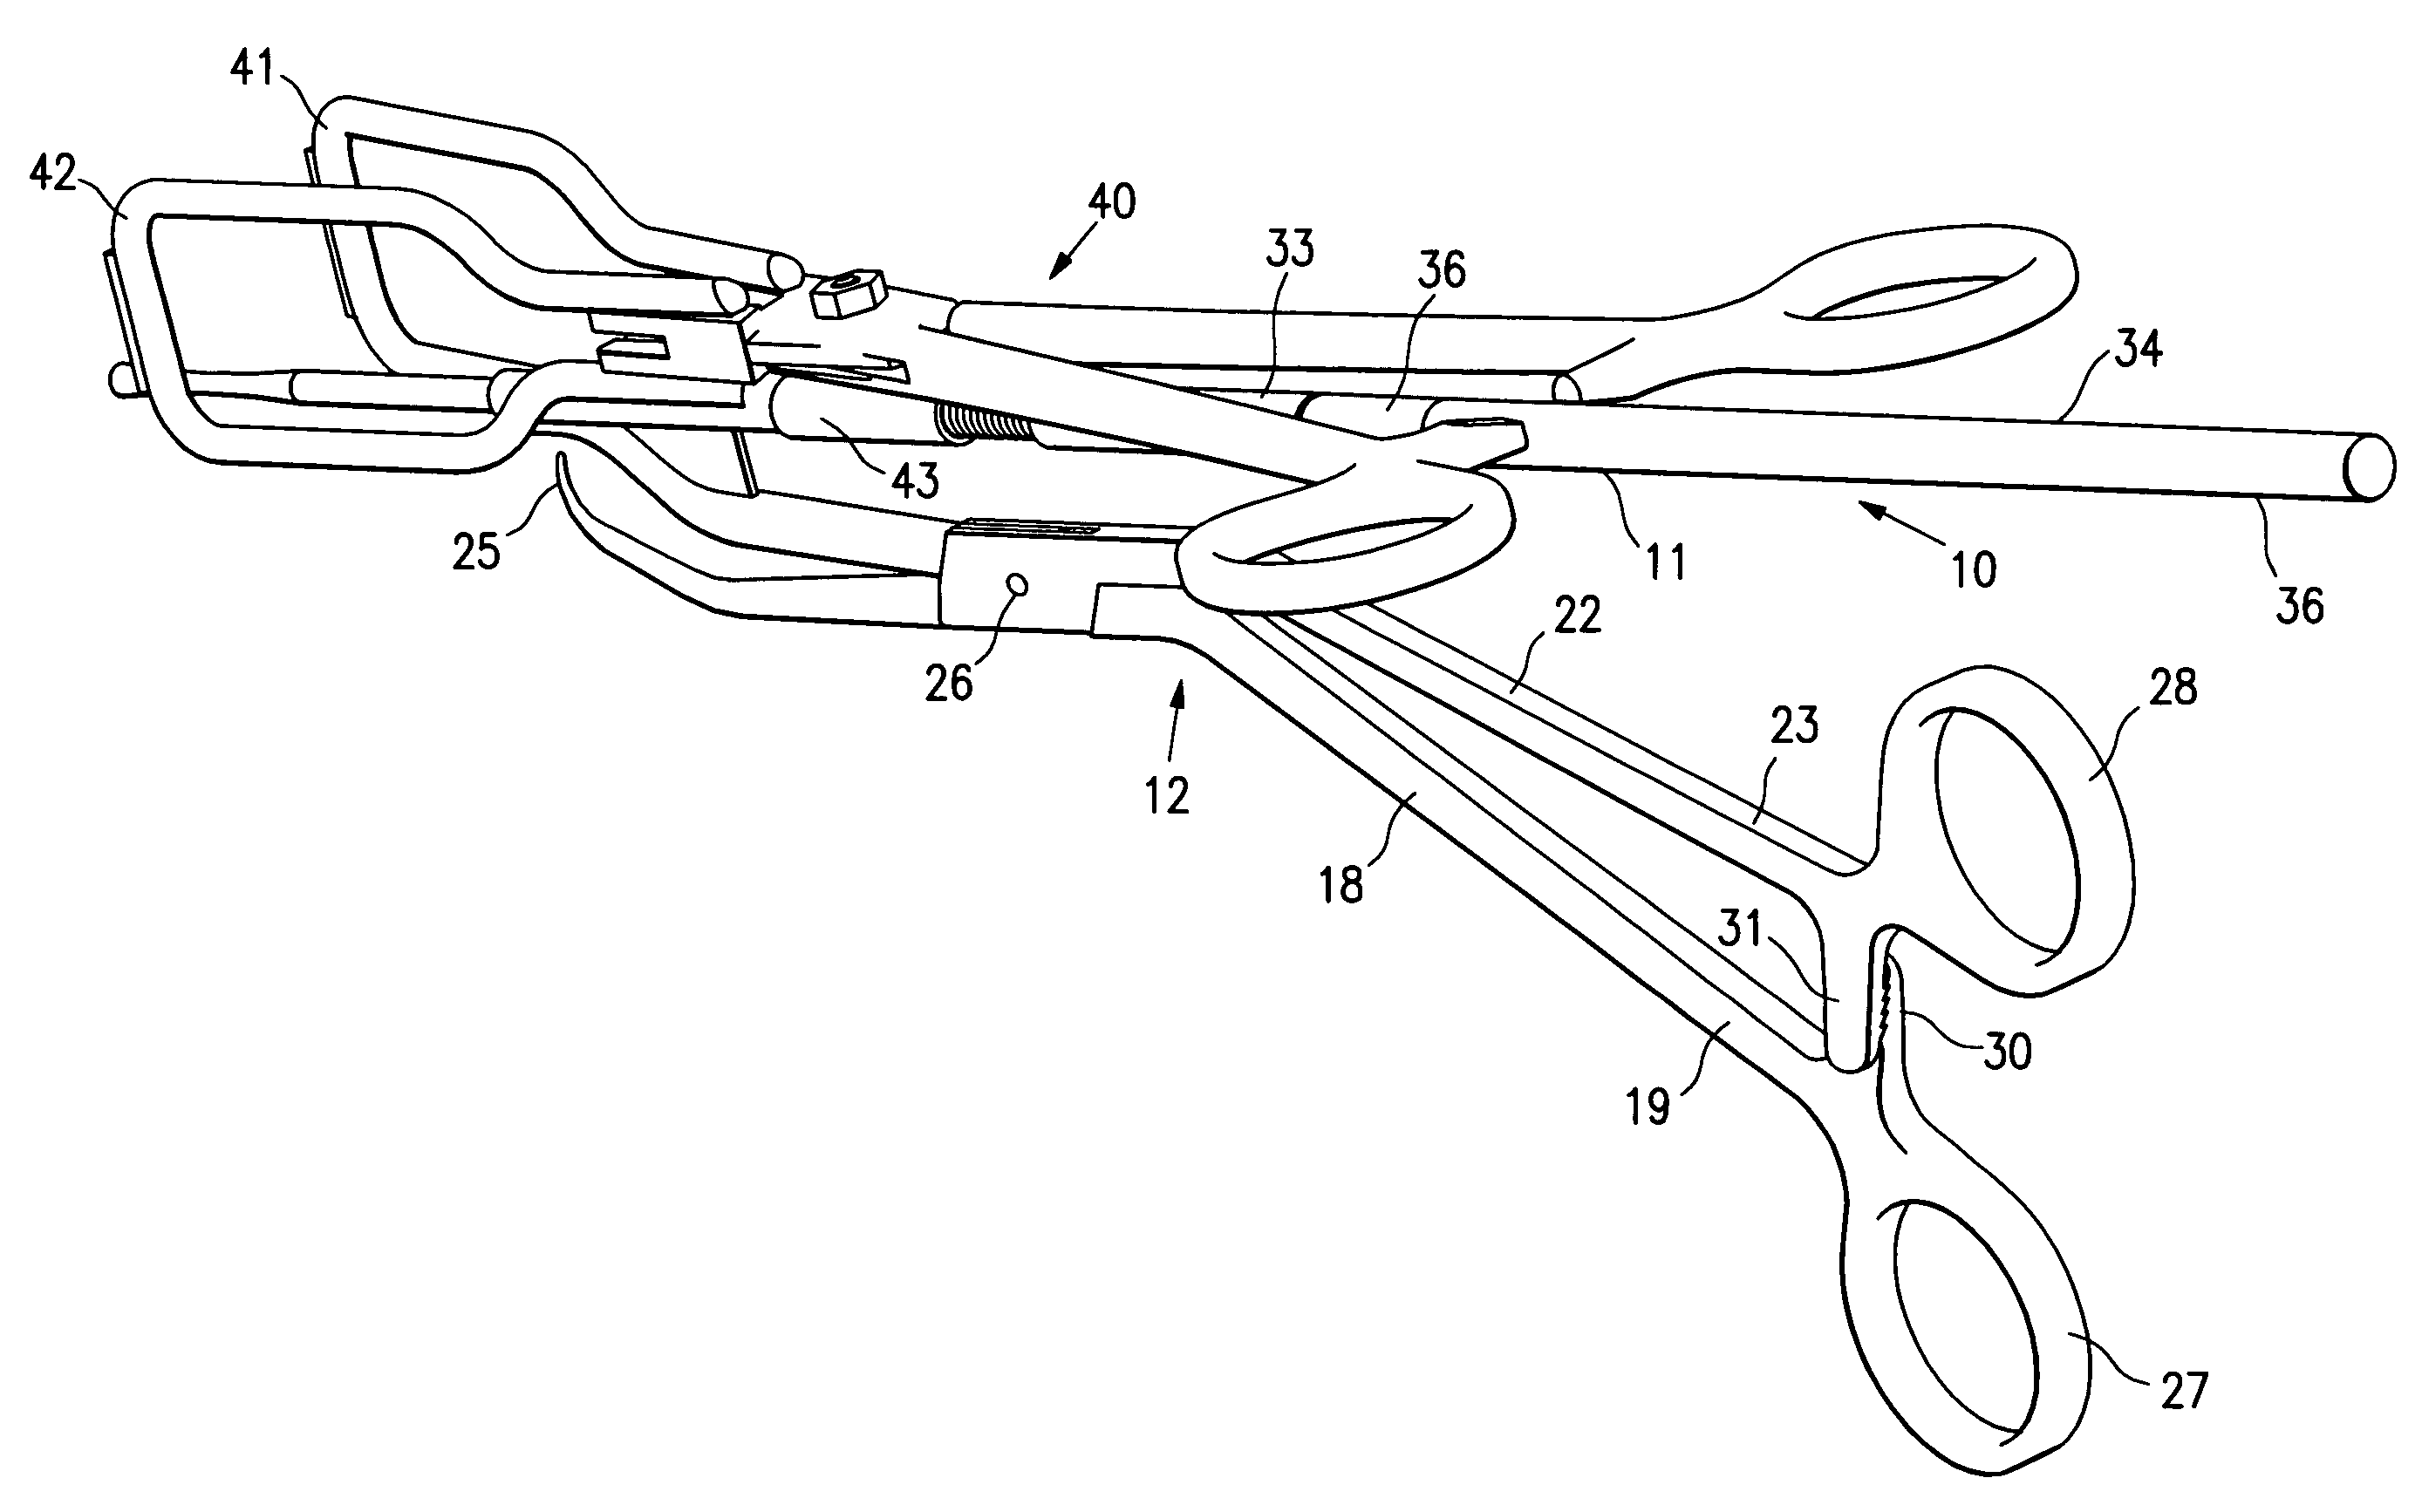 Tenaculum-like device for intravaginal instrument delivery